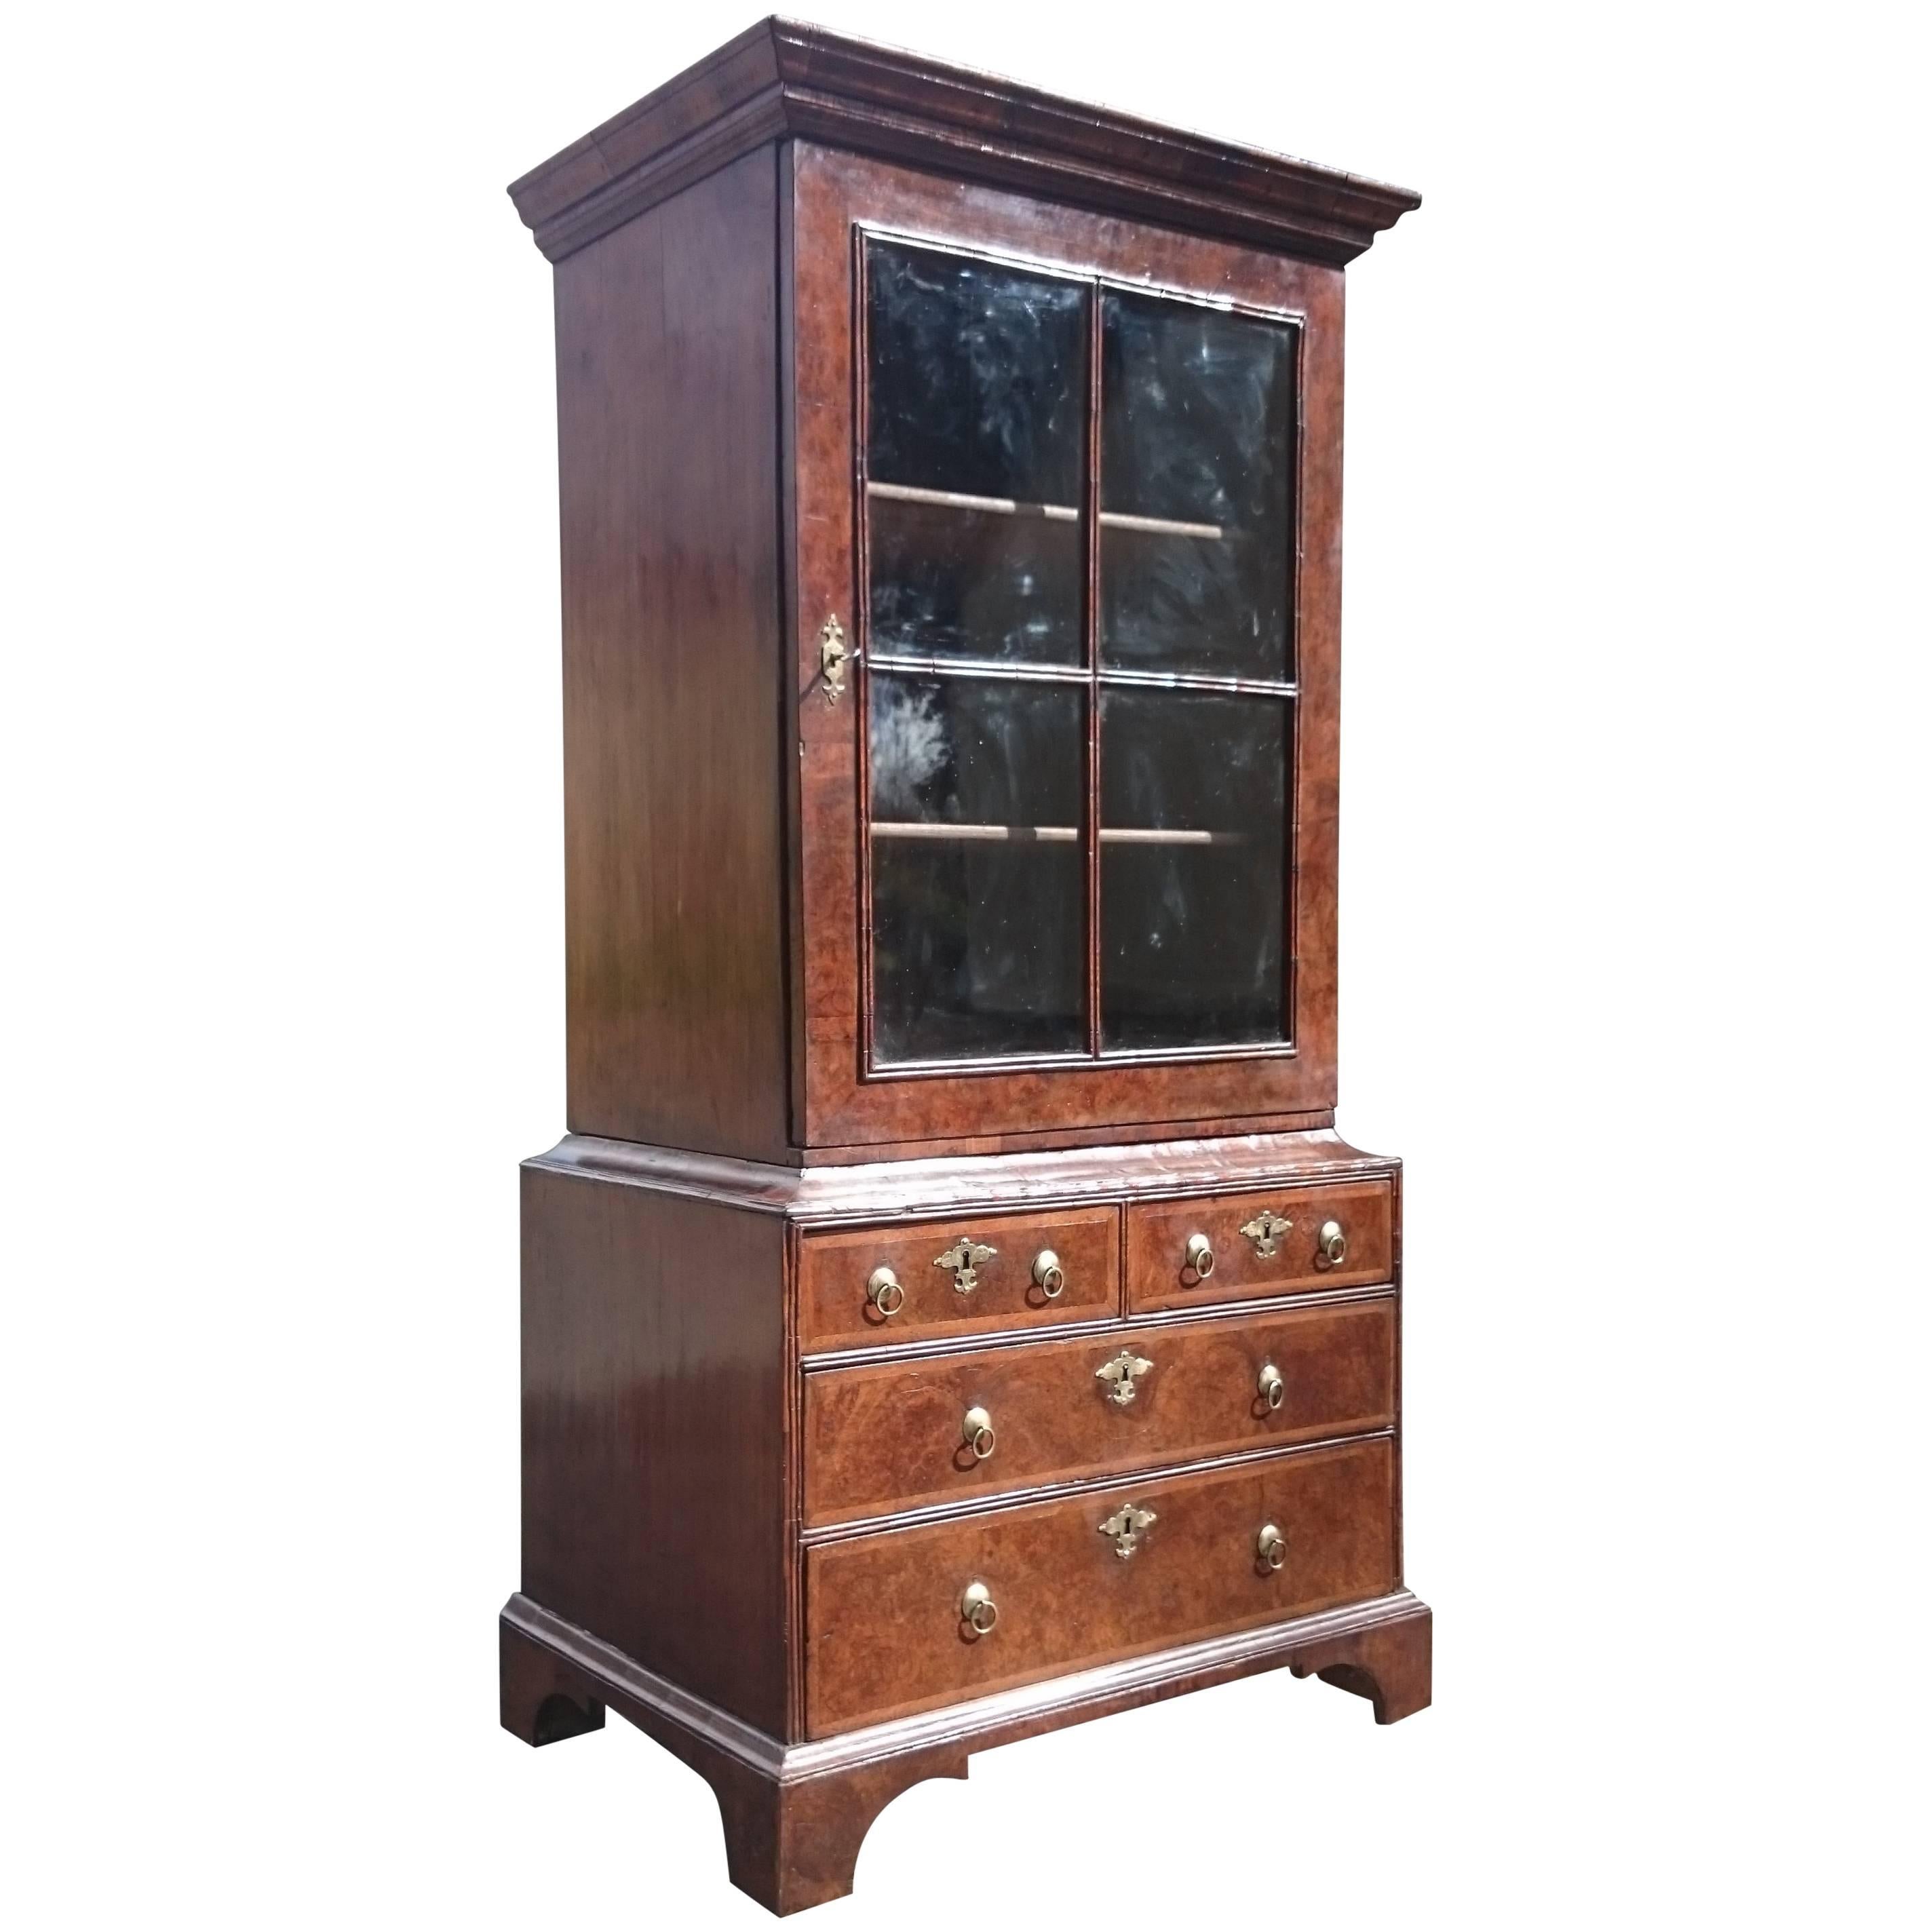 Early 18th Century Queen Anne Burl Walnut Antique Bookcase Cabinet For Sale